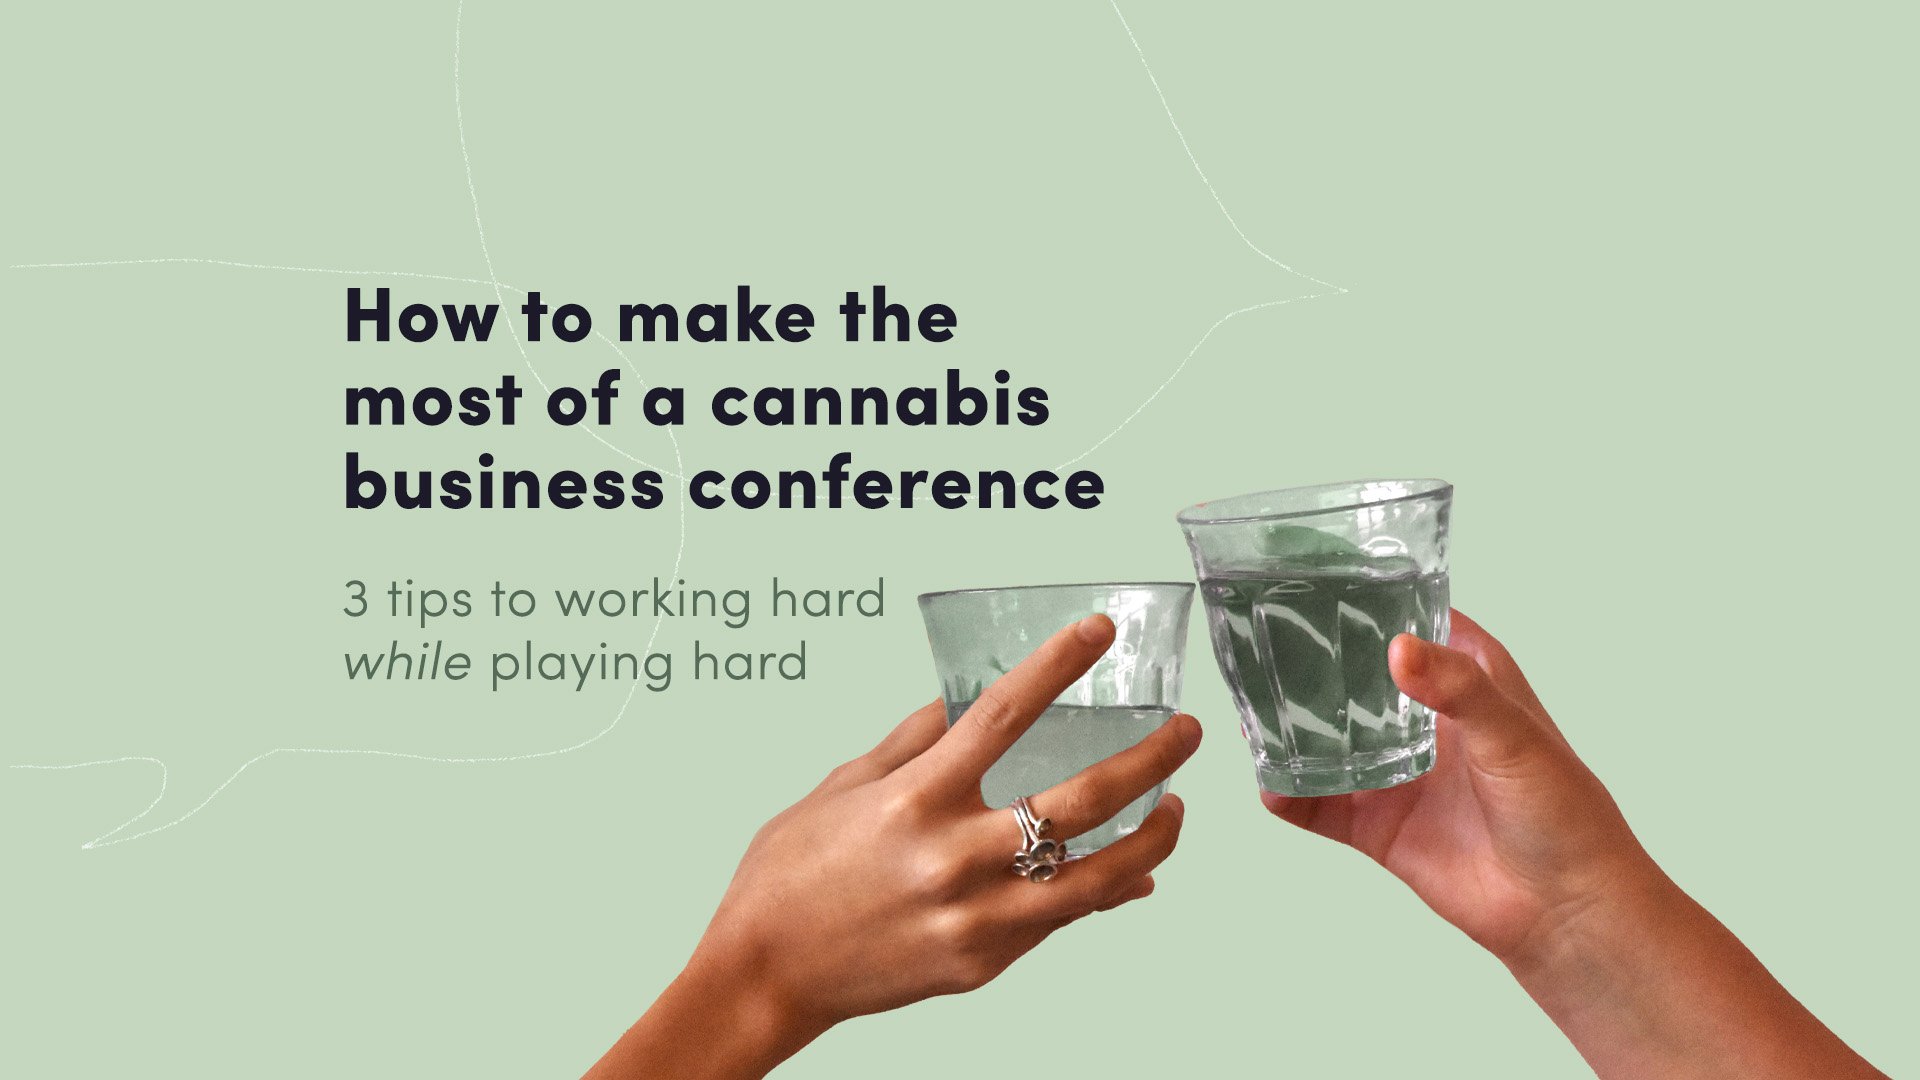 How to make the most of a cannabis business conference: 3 tips for working hard while playing hard